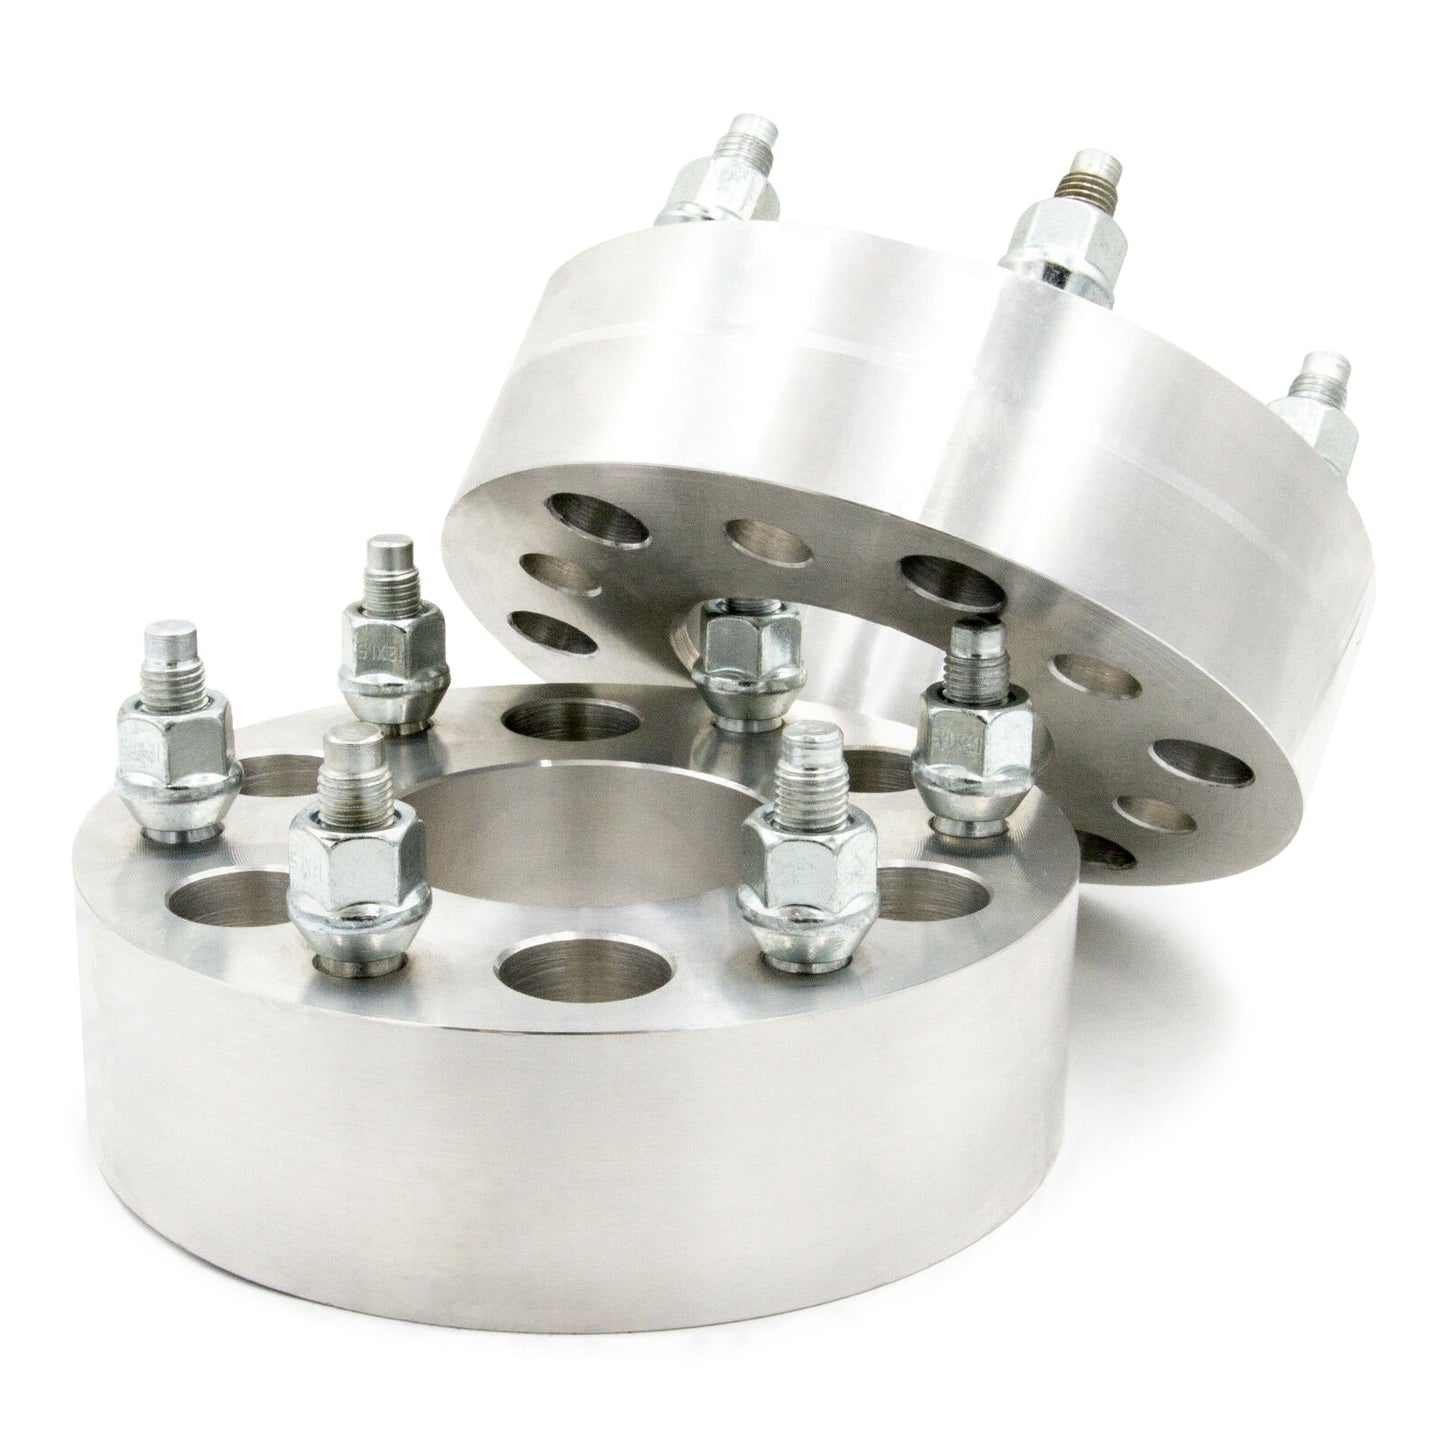 6x5" to 6x132 Wheel Spacer/Adapter - Thickness: 3/4"- 4"